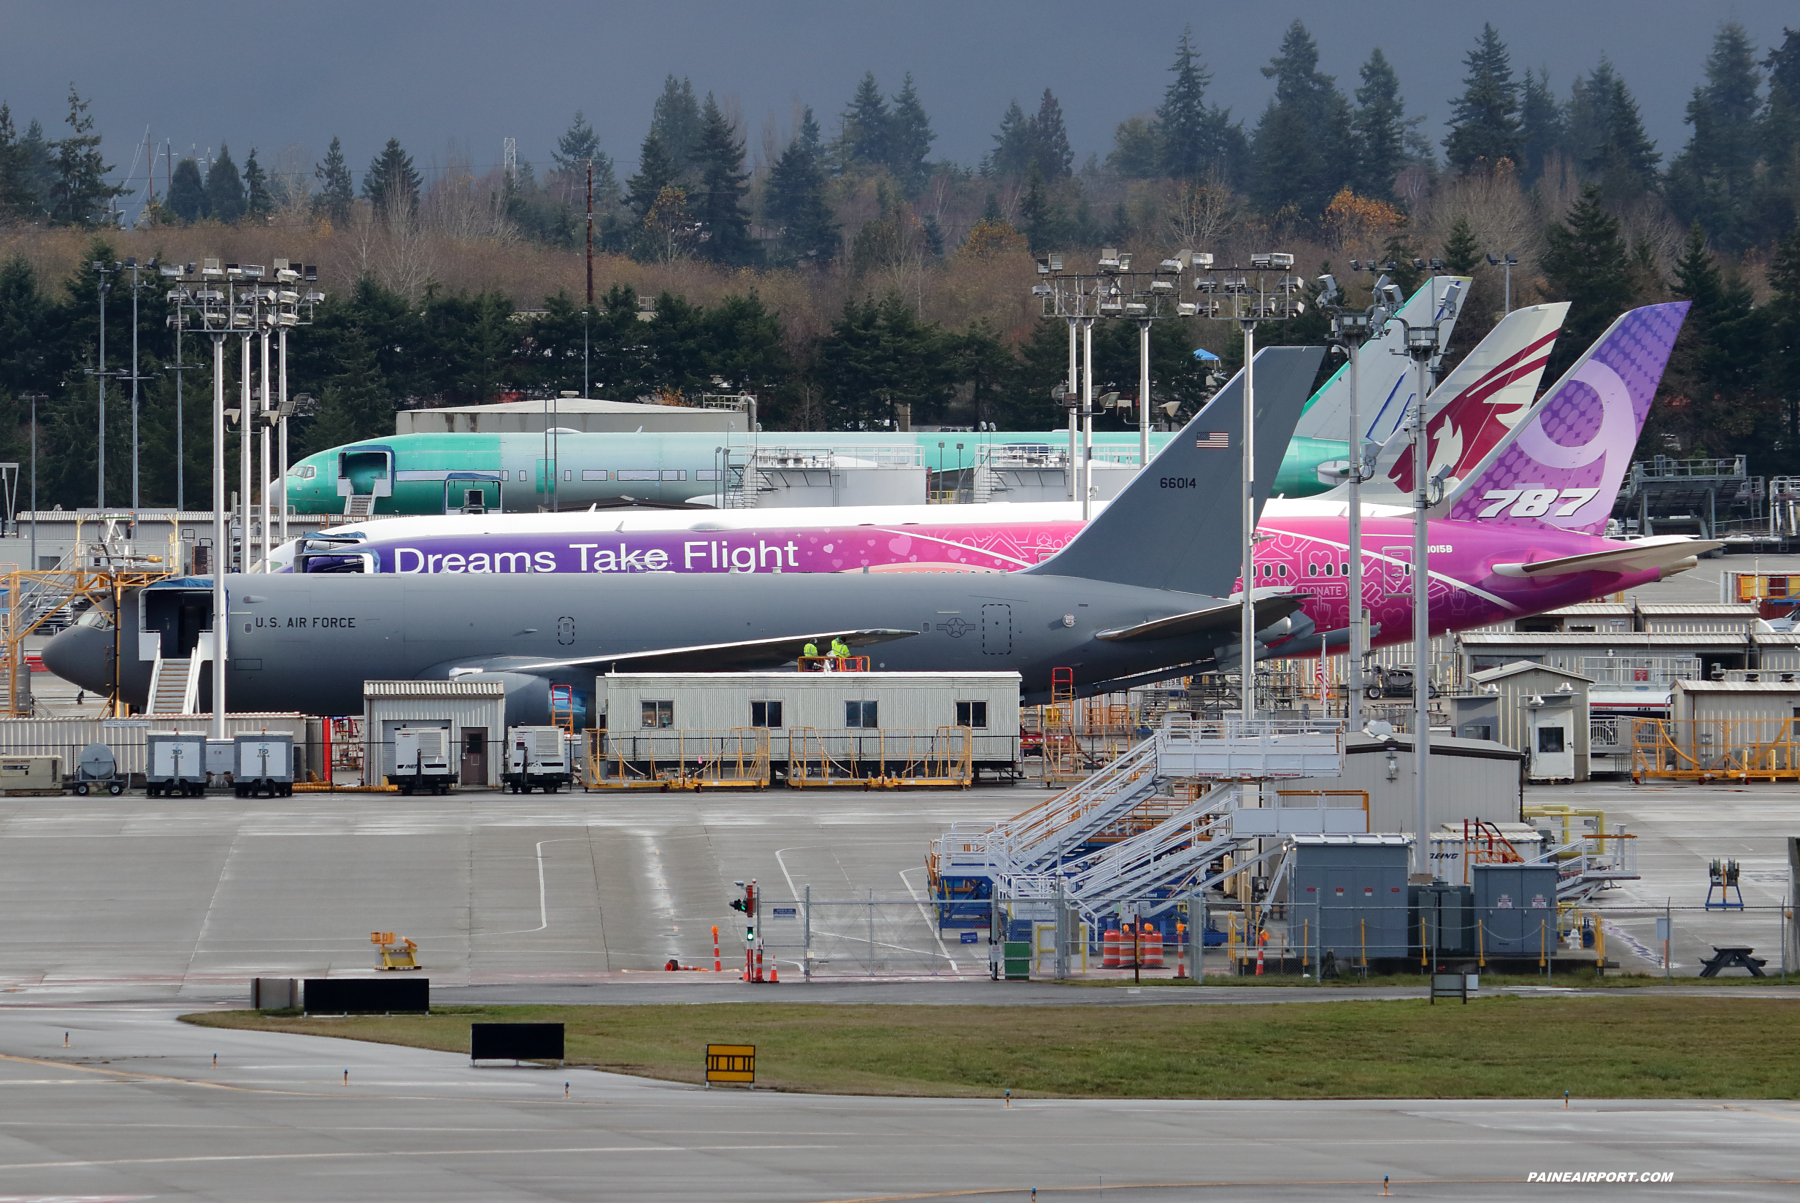 ANA 777 line 1637 at Paine Field